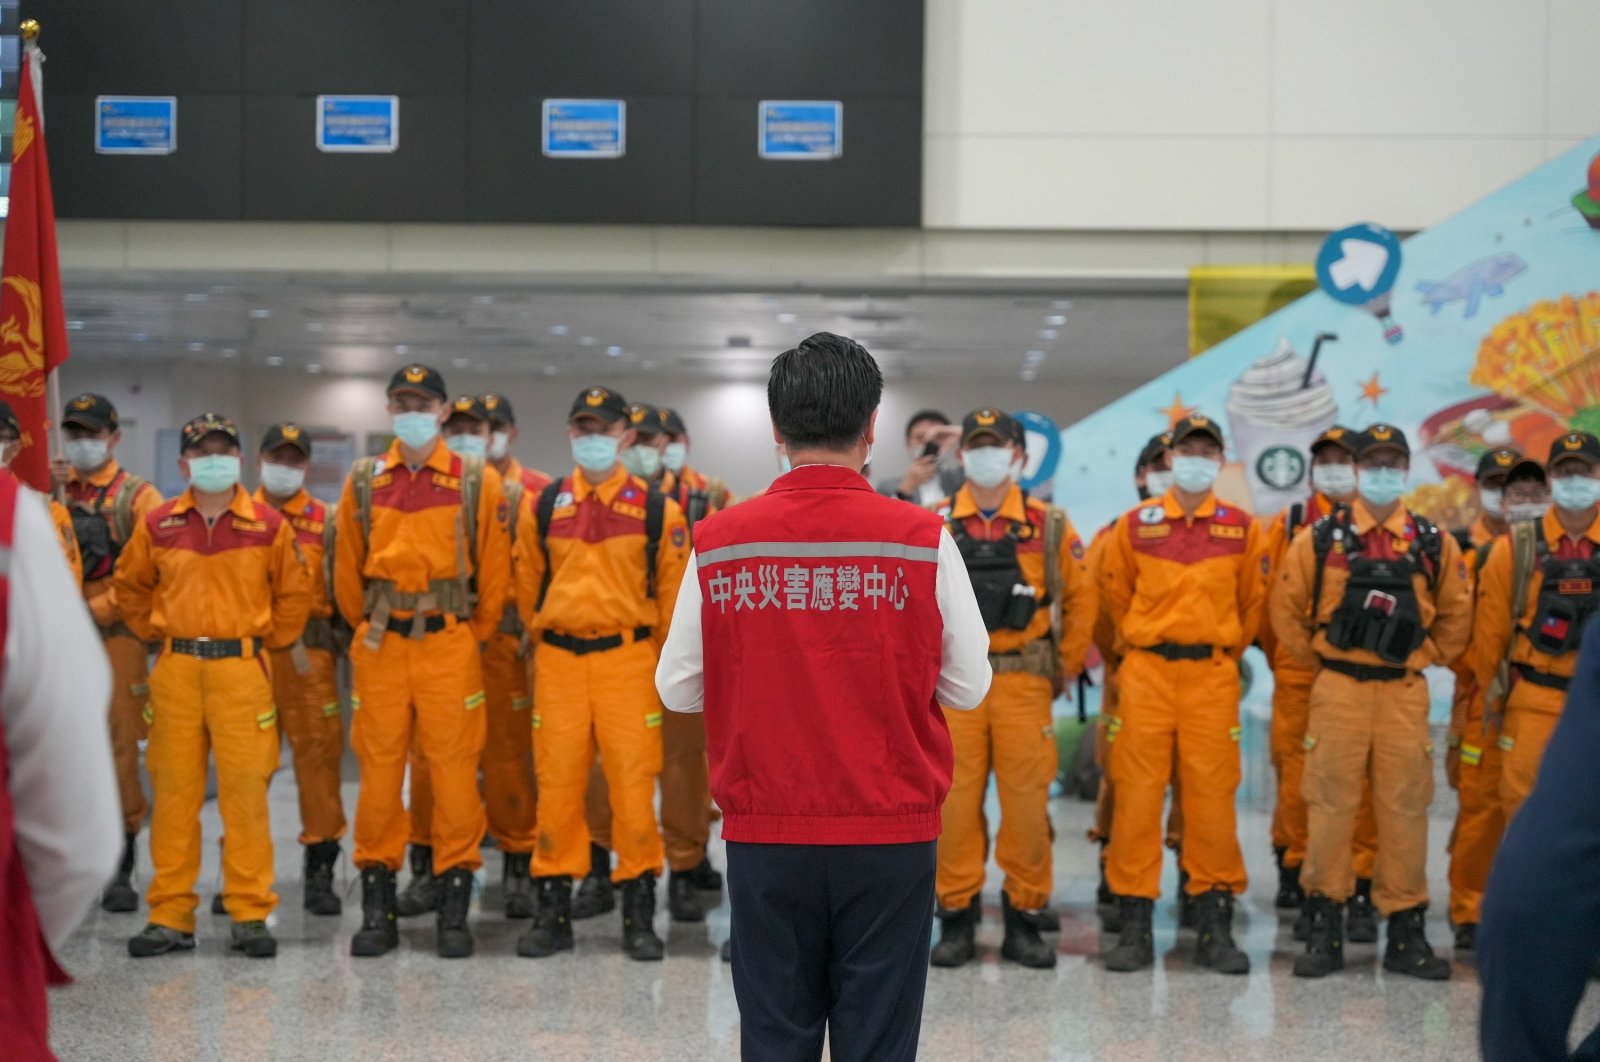 Taiwan&#039;s Foreign Minister Joseph Wu is seen with a rescue group that is heading off to Türkiye to assist the earthquake response, Taipei, Taiwan, Feb. 6, 2023 (AA Photo)